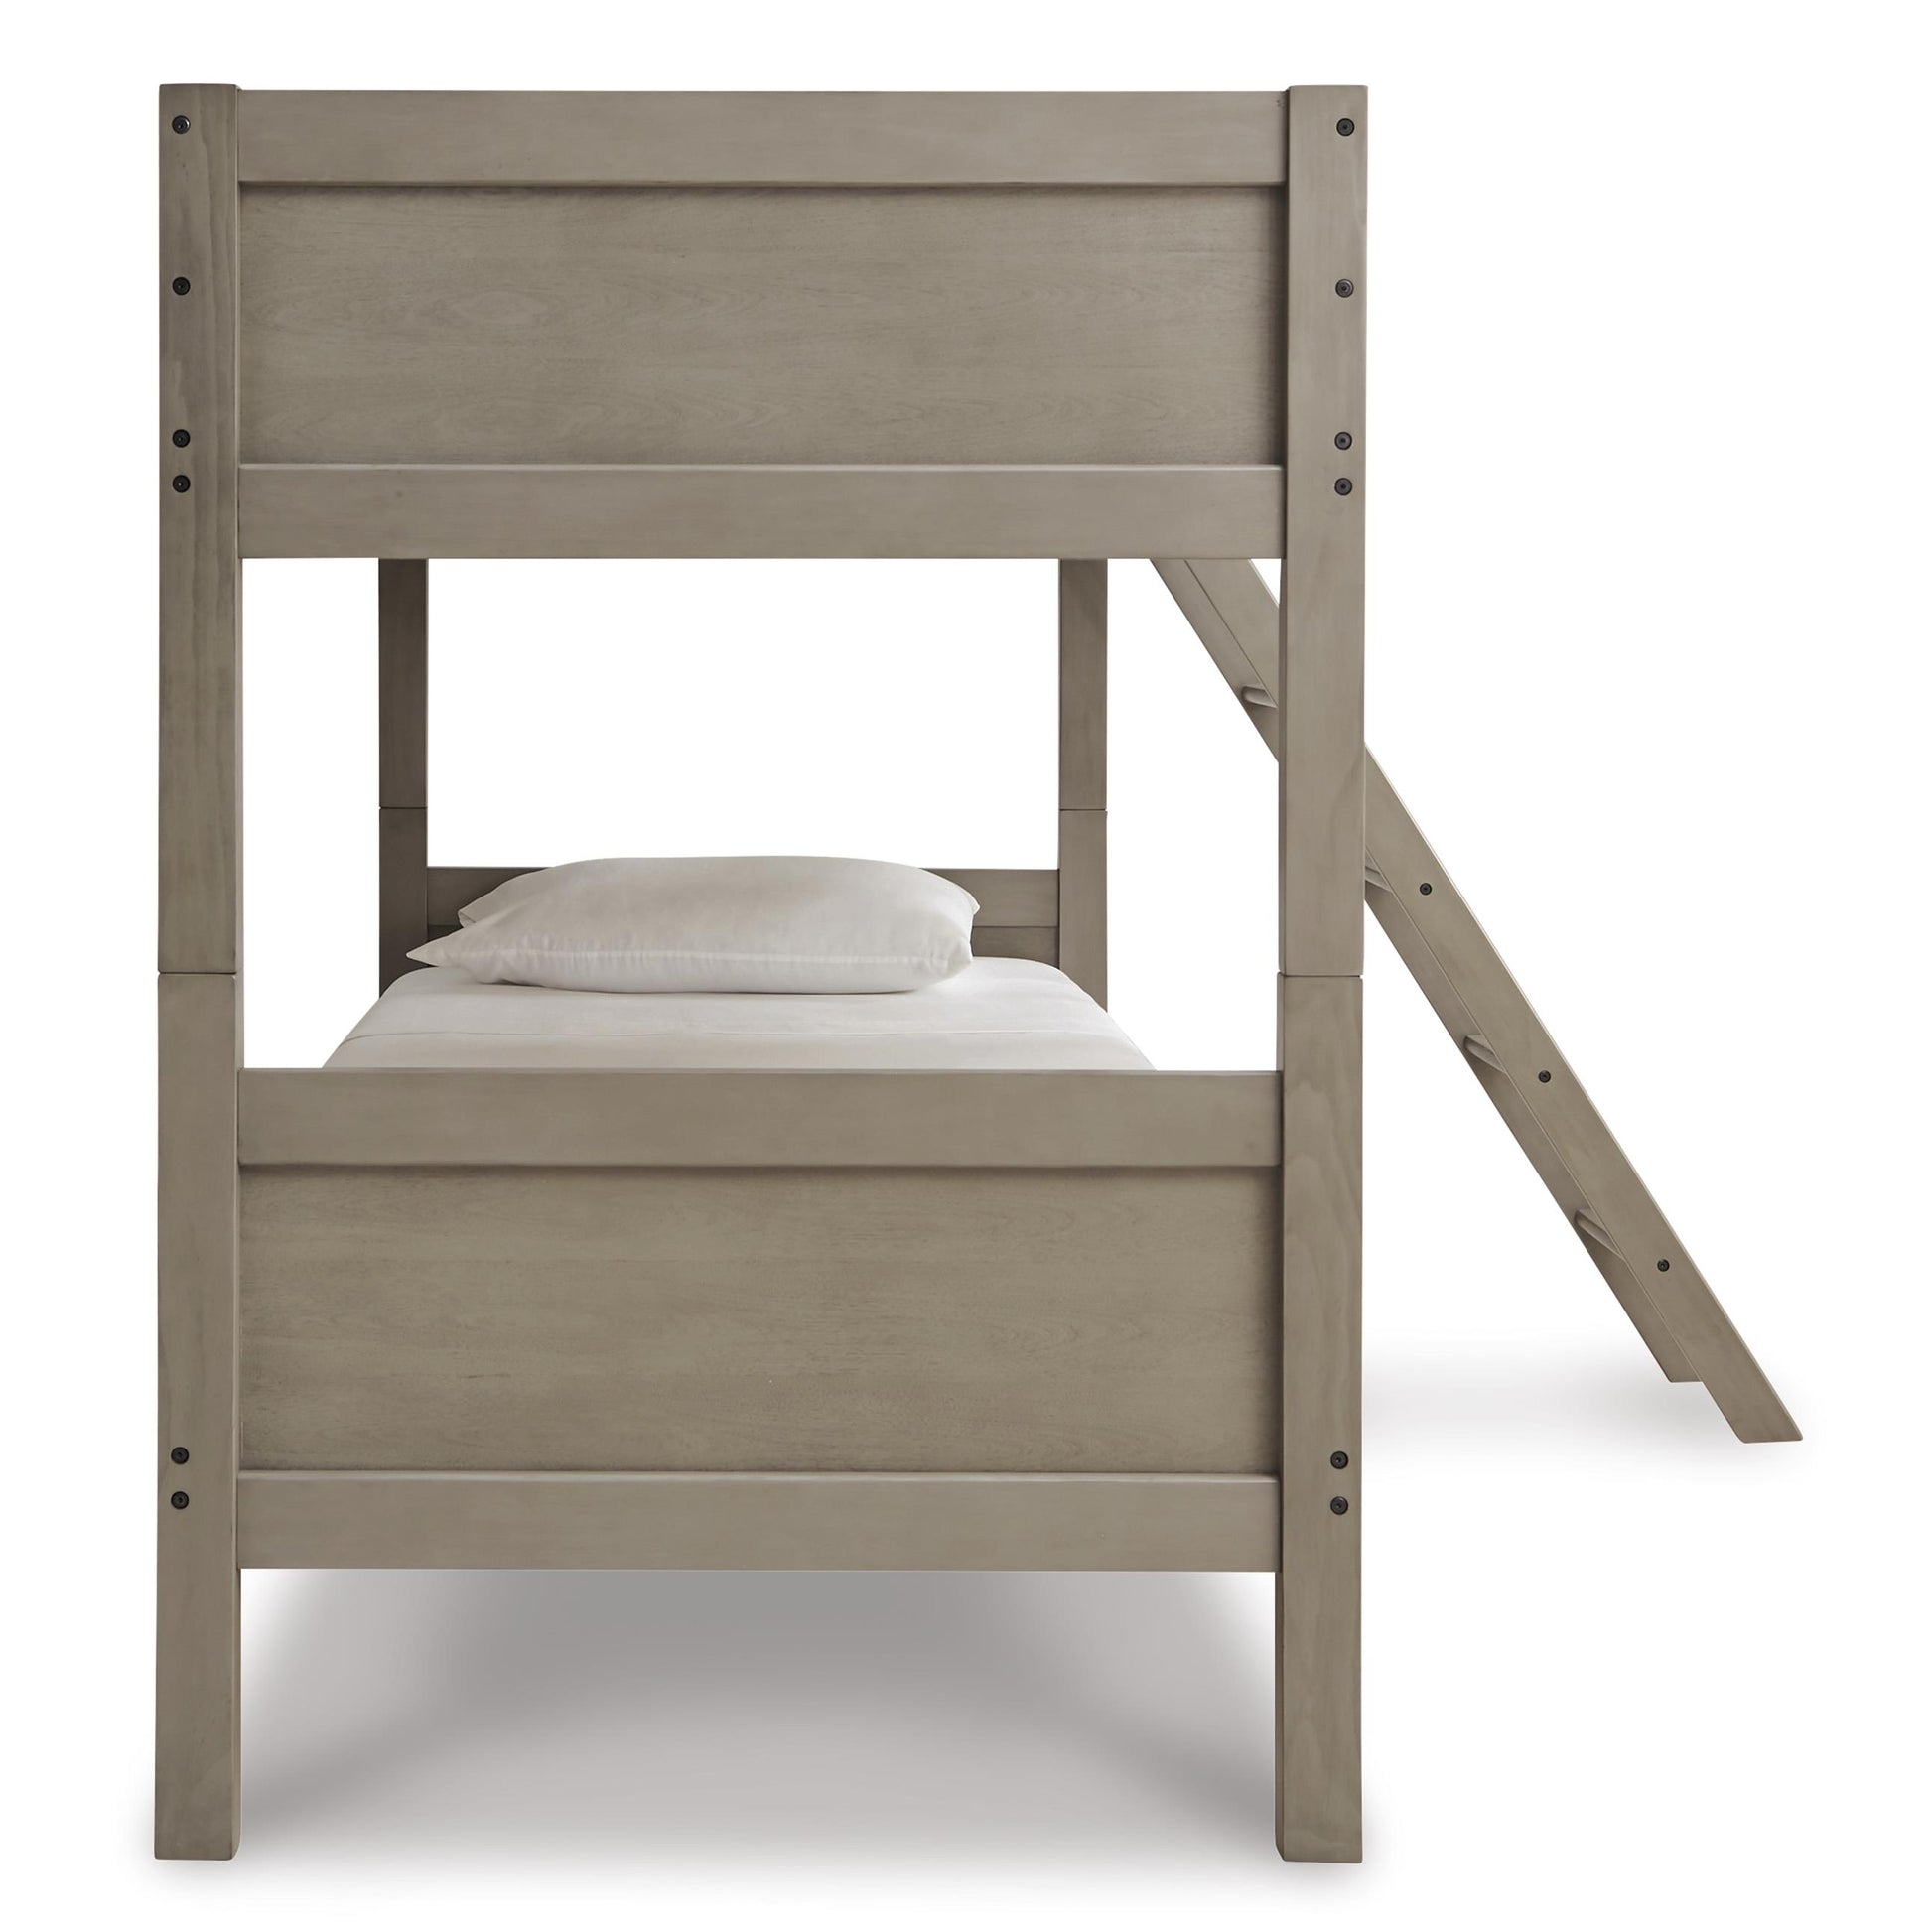 Signature Design by Ashley Kids Beds Bunk Bed B733-59/M96311/M96311 IMAGE 3